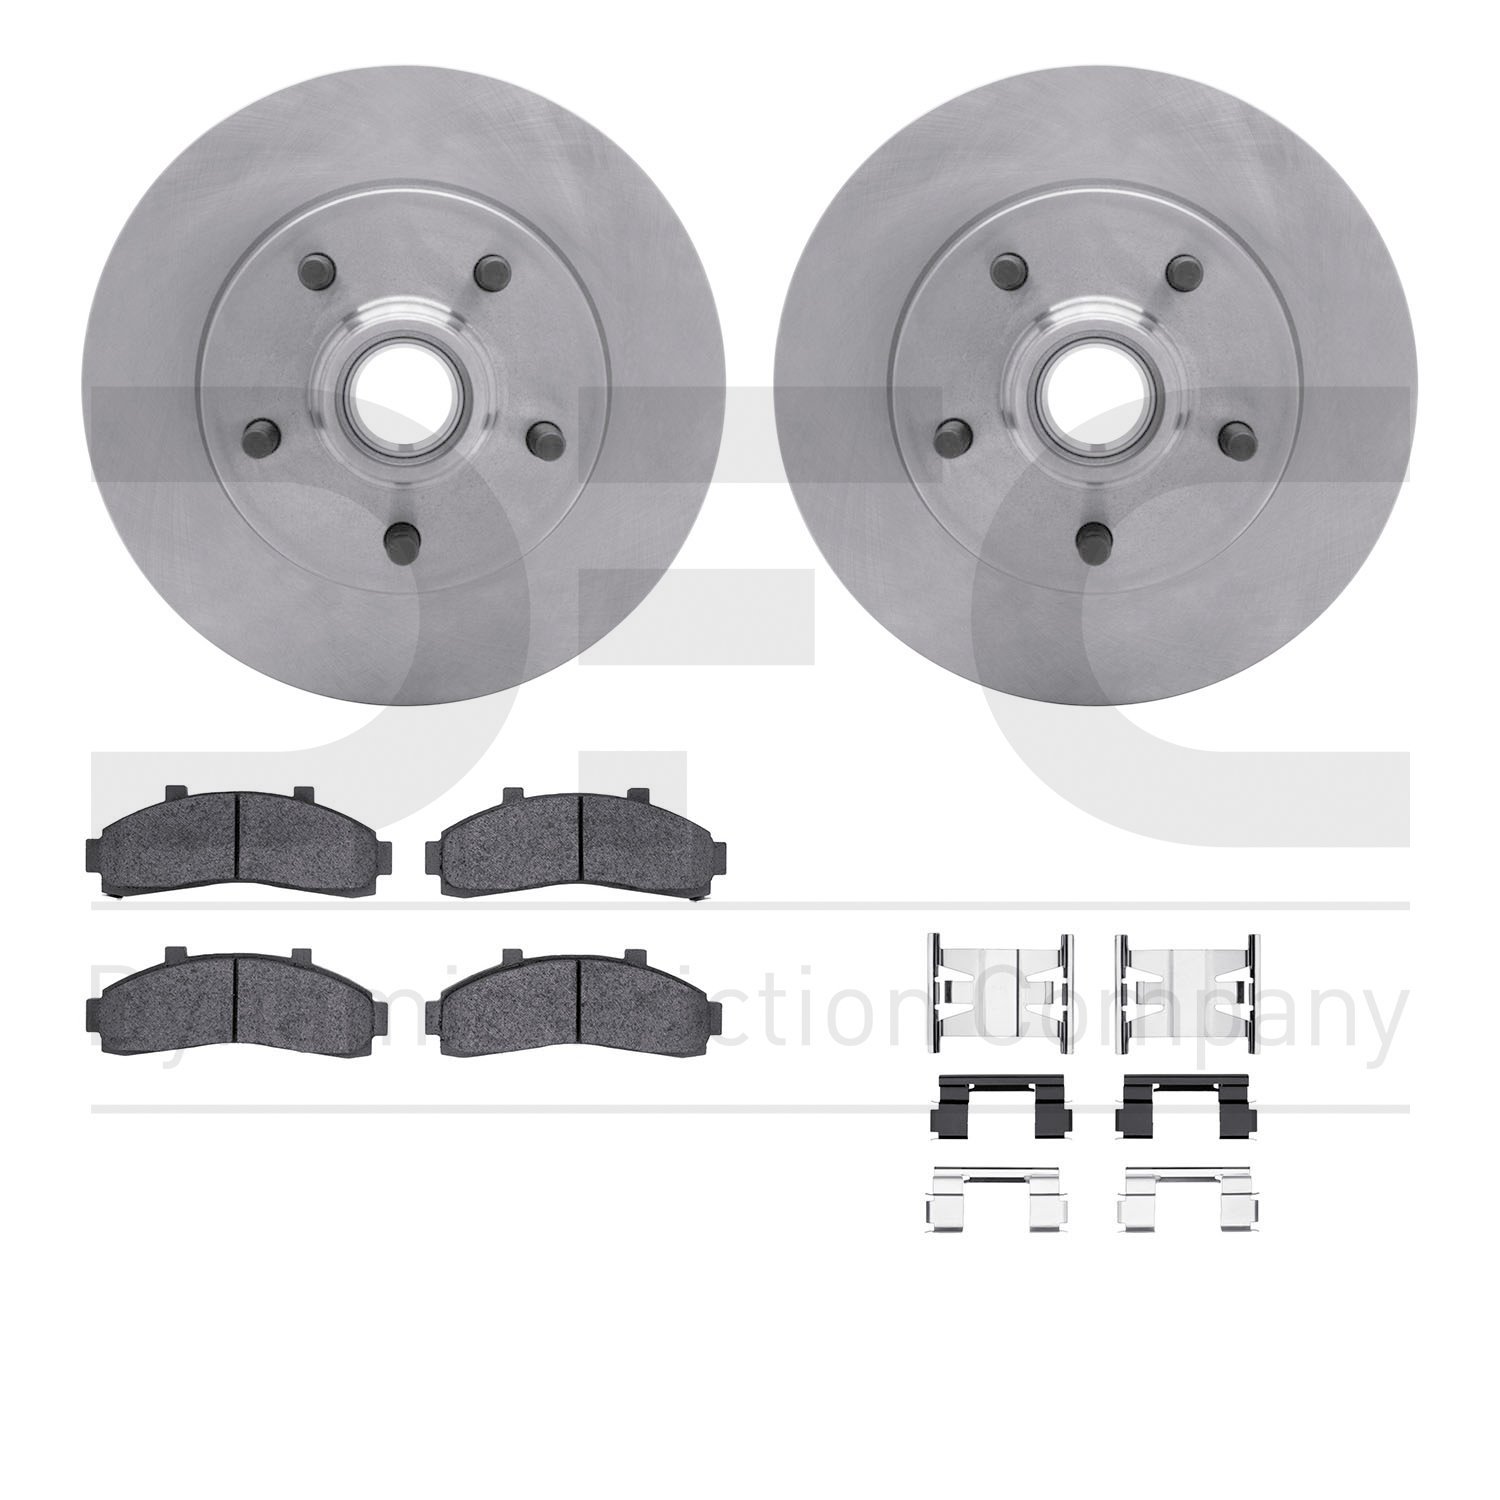 6412-54155 Brake Rotors with Ultimate-Duty Brake Pads Kit & Hardware, 1998-2002 Ford/Lincoln/Mercury/Mazda, Position: Front